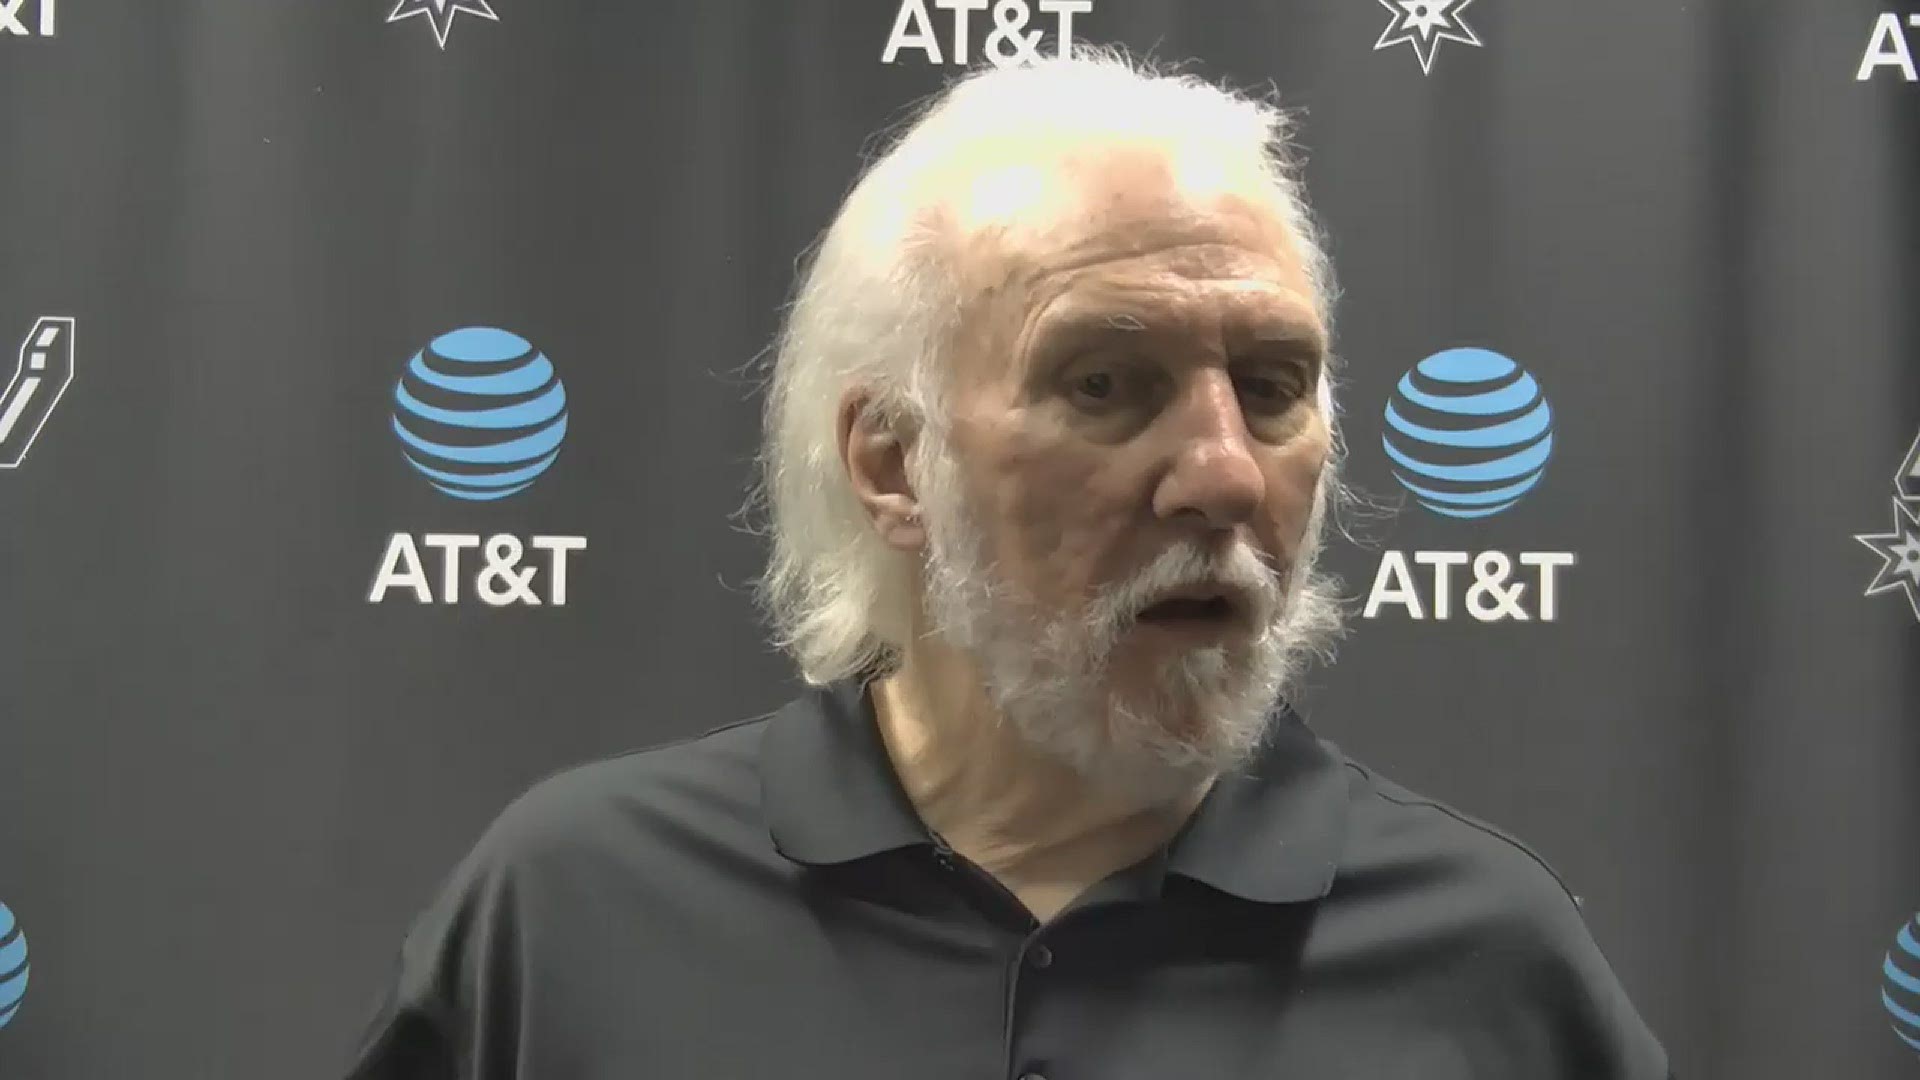 Pop said his team worked hard and didn't give in, praising Lonnie Walker, Luka Samanic, and Dejounte Murray after a tough loss.